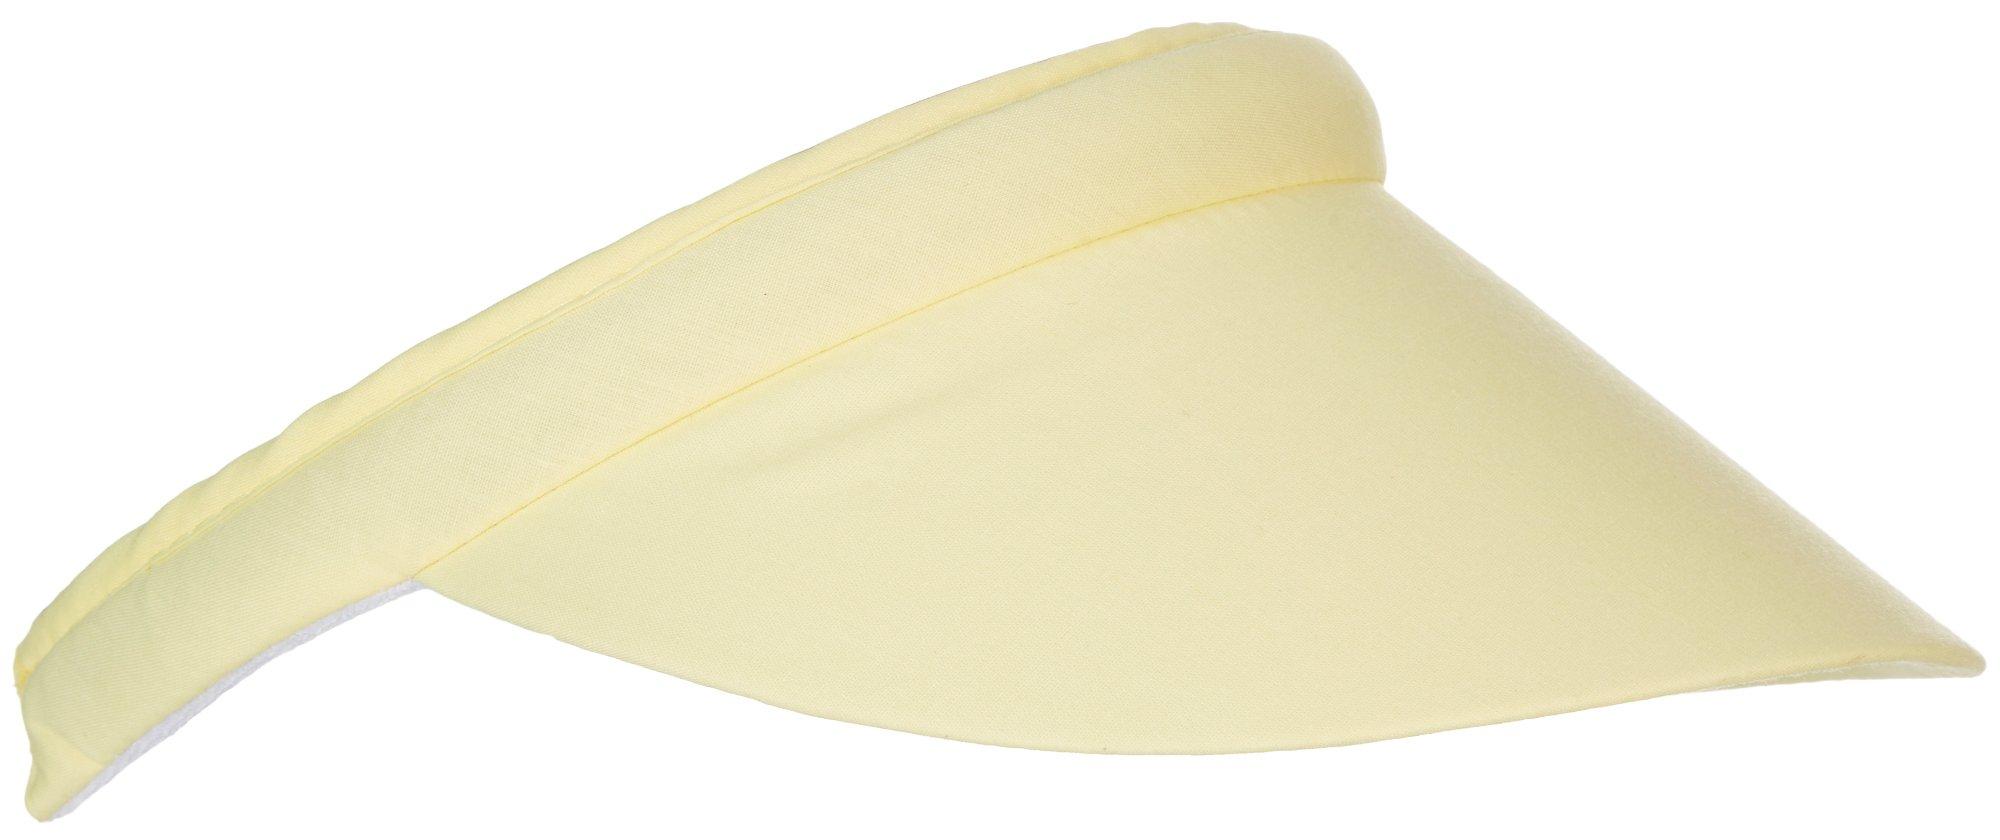 Madd Hatter Womens Solid Color Cotton Sun Visor